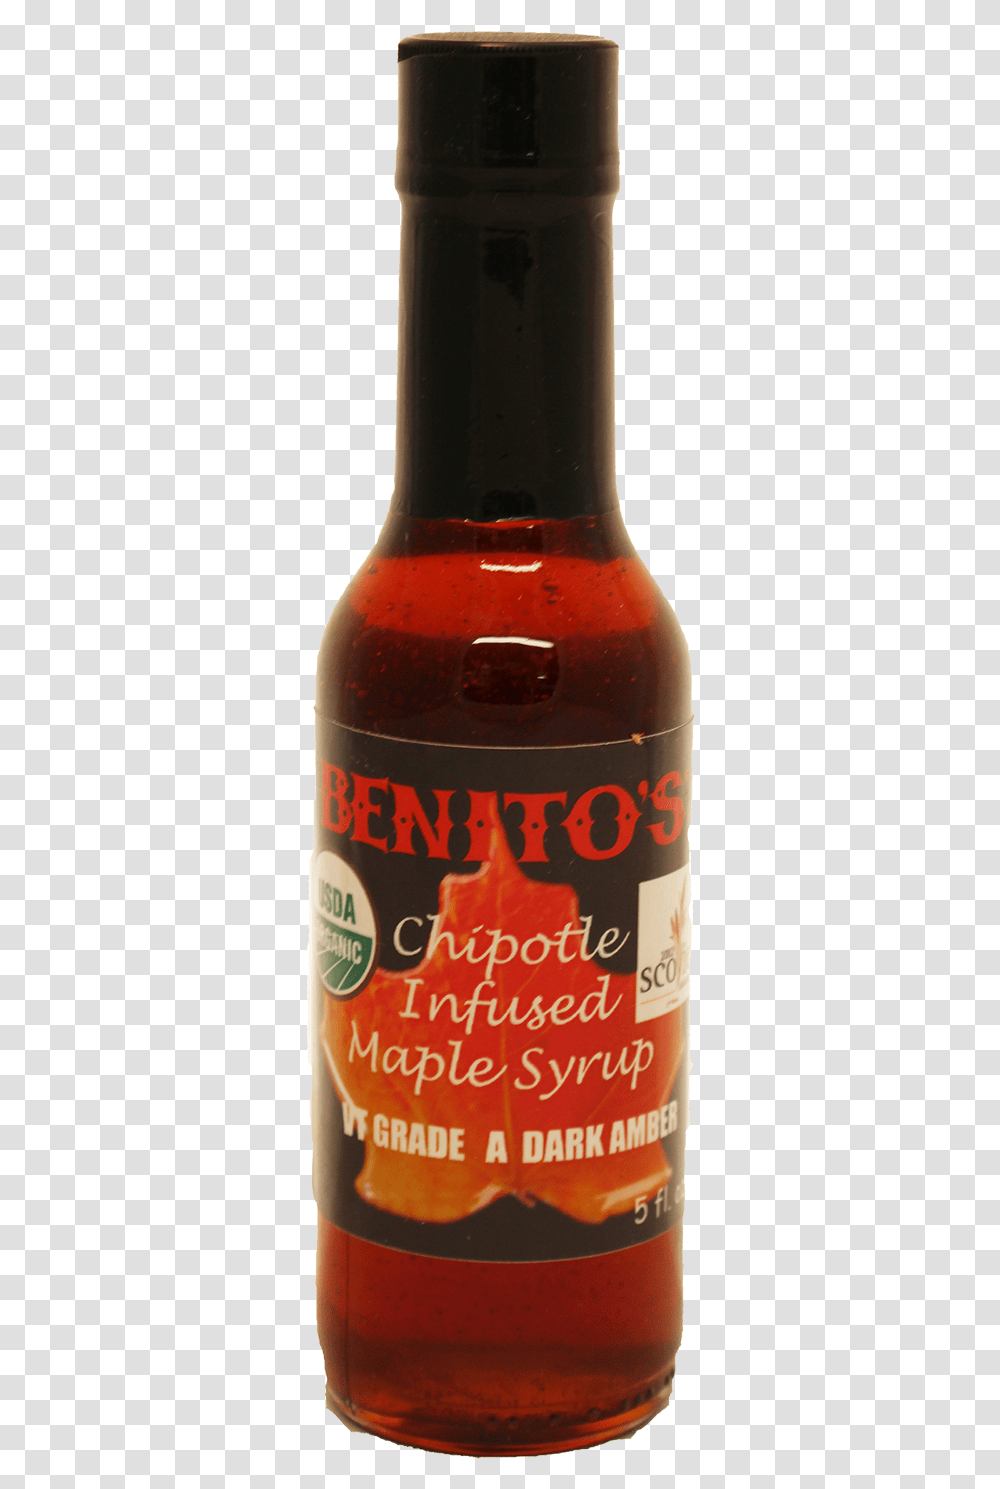 Benitos Hot Sauce Chipolte Infused Maple Syrup Glass Bottle, Beer, Alcohol, Beverage, Food Transparent Png